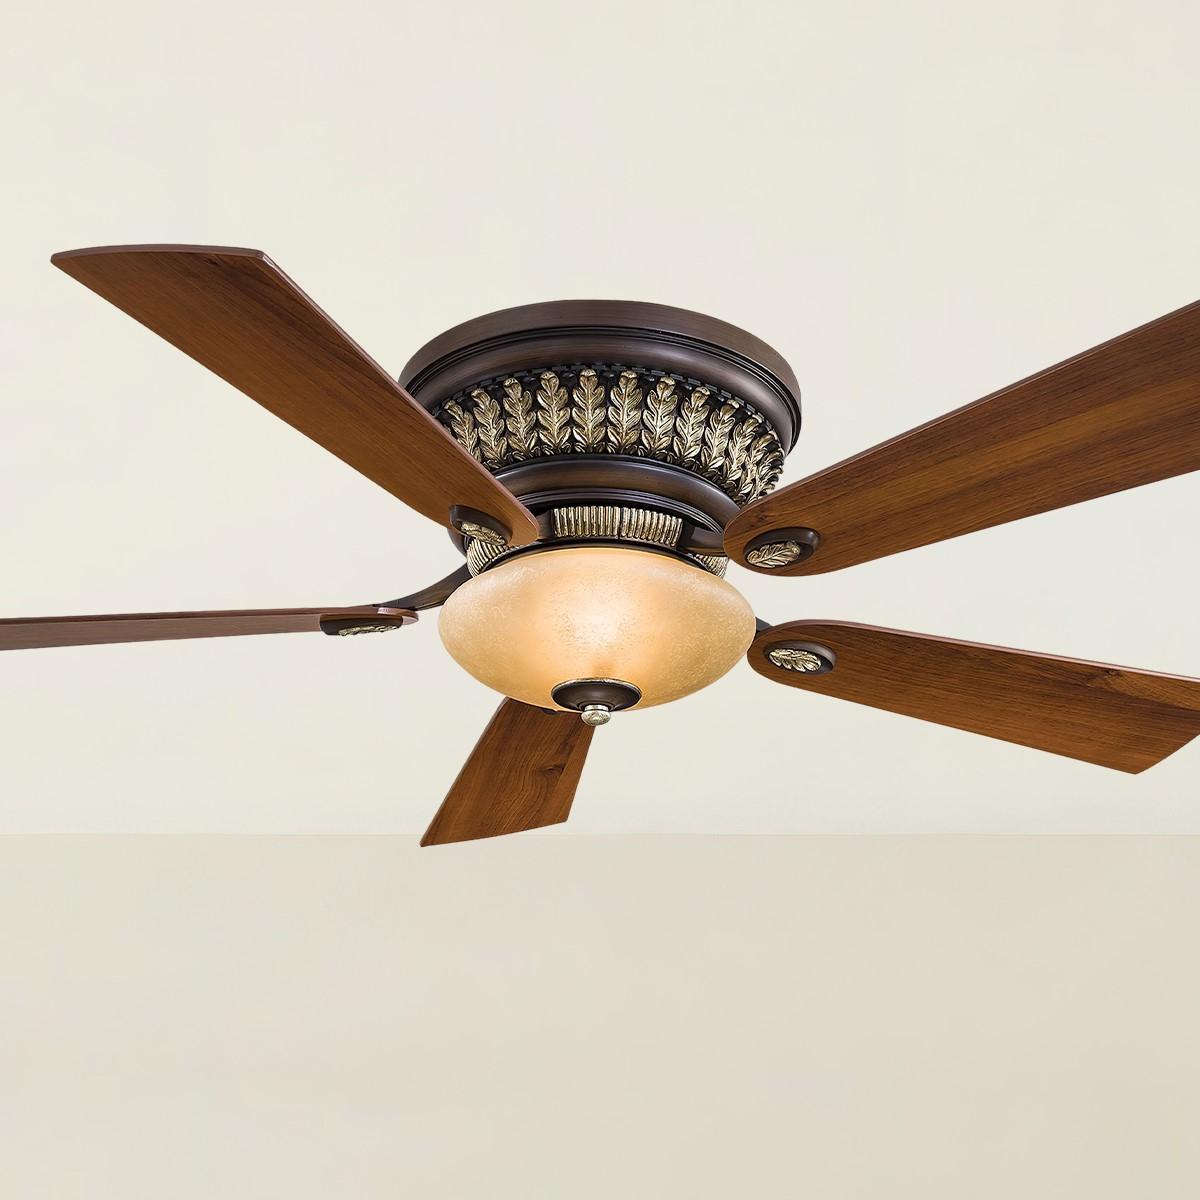 Calais 52 Inch Ceiling Fan With Light And Remote, Belcaro Walnut Finish